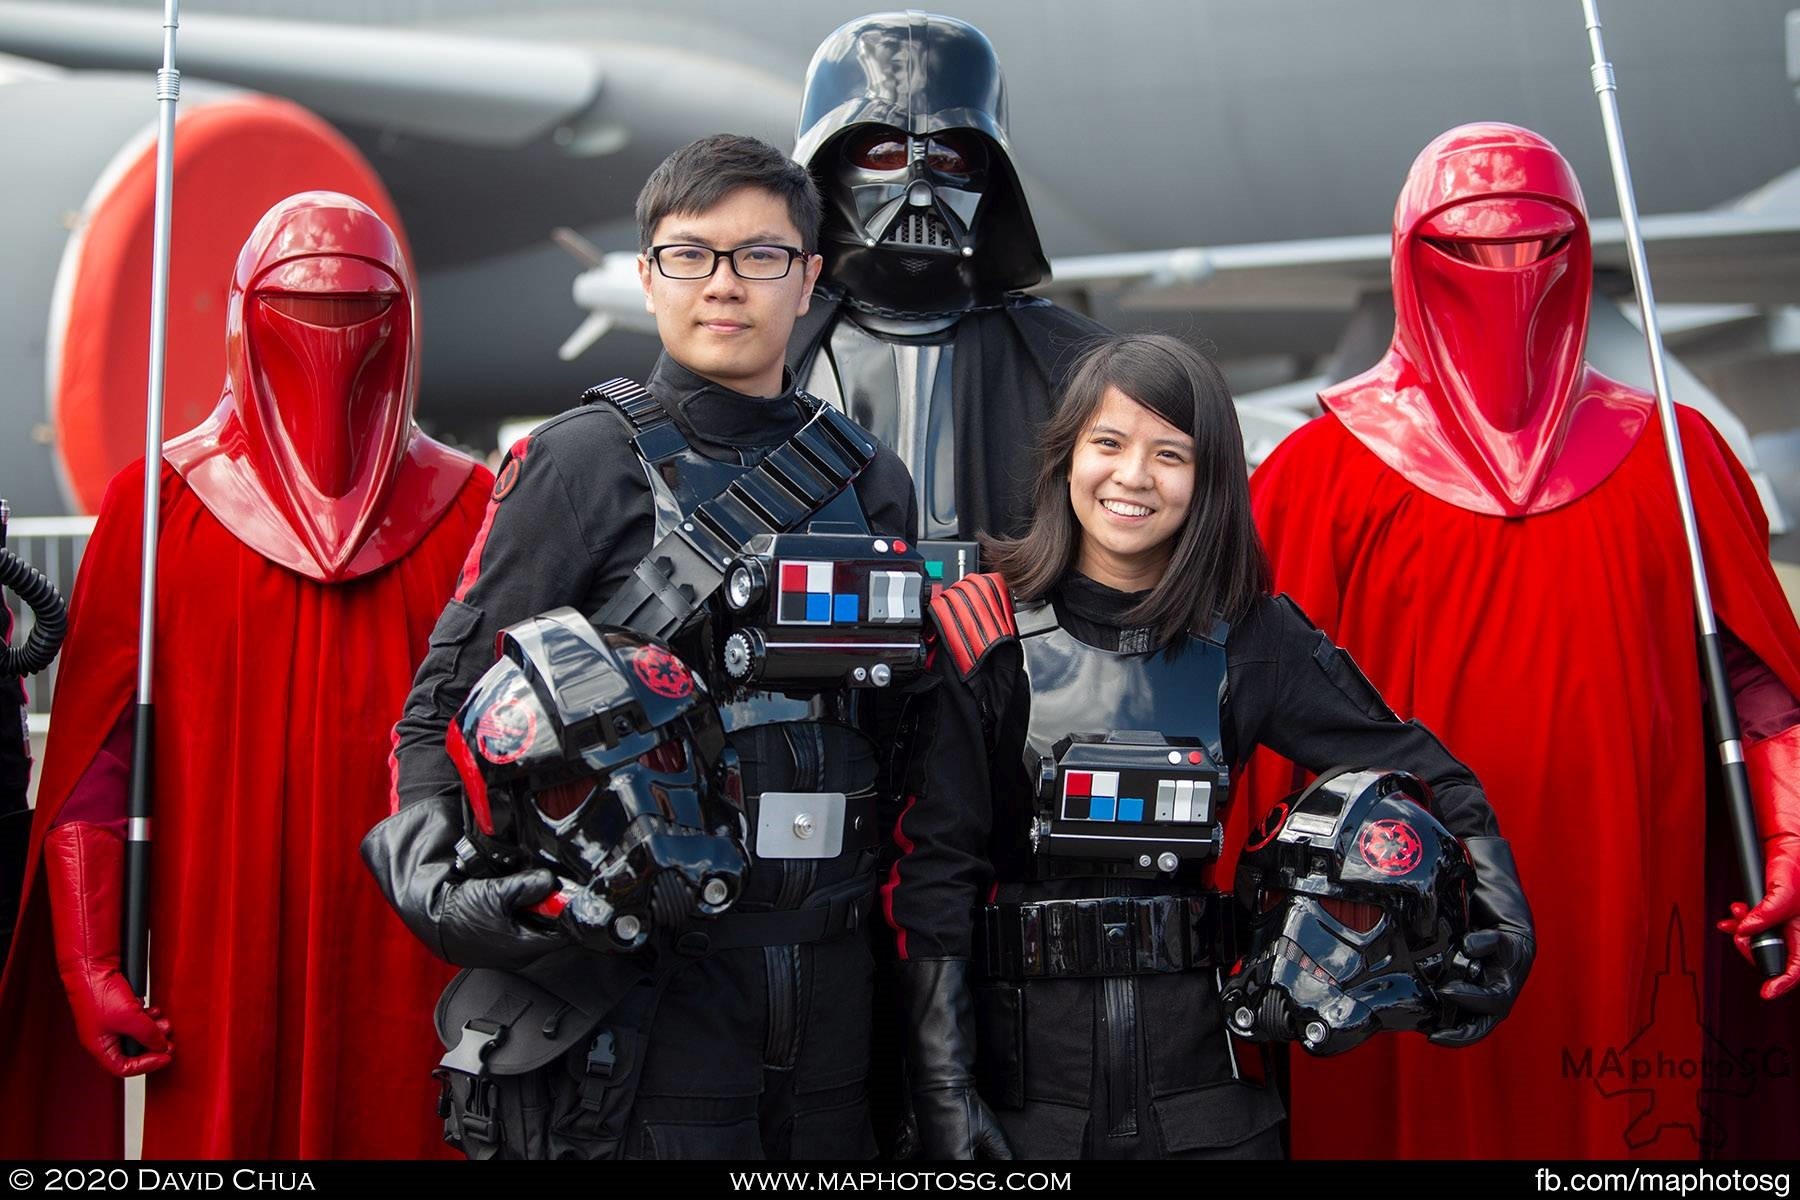 Members of the local 501st Singapore Garrison present at the static aircraft display area